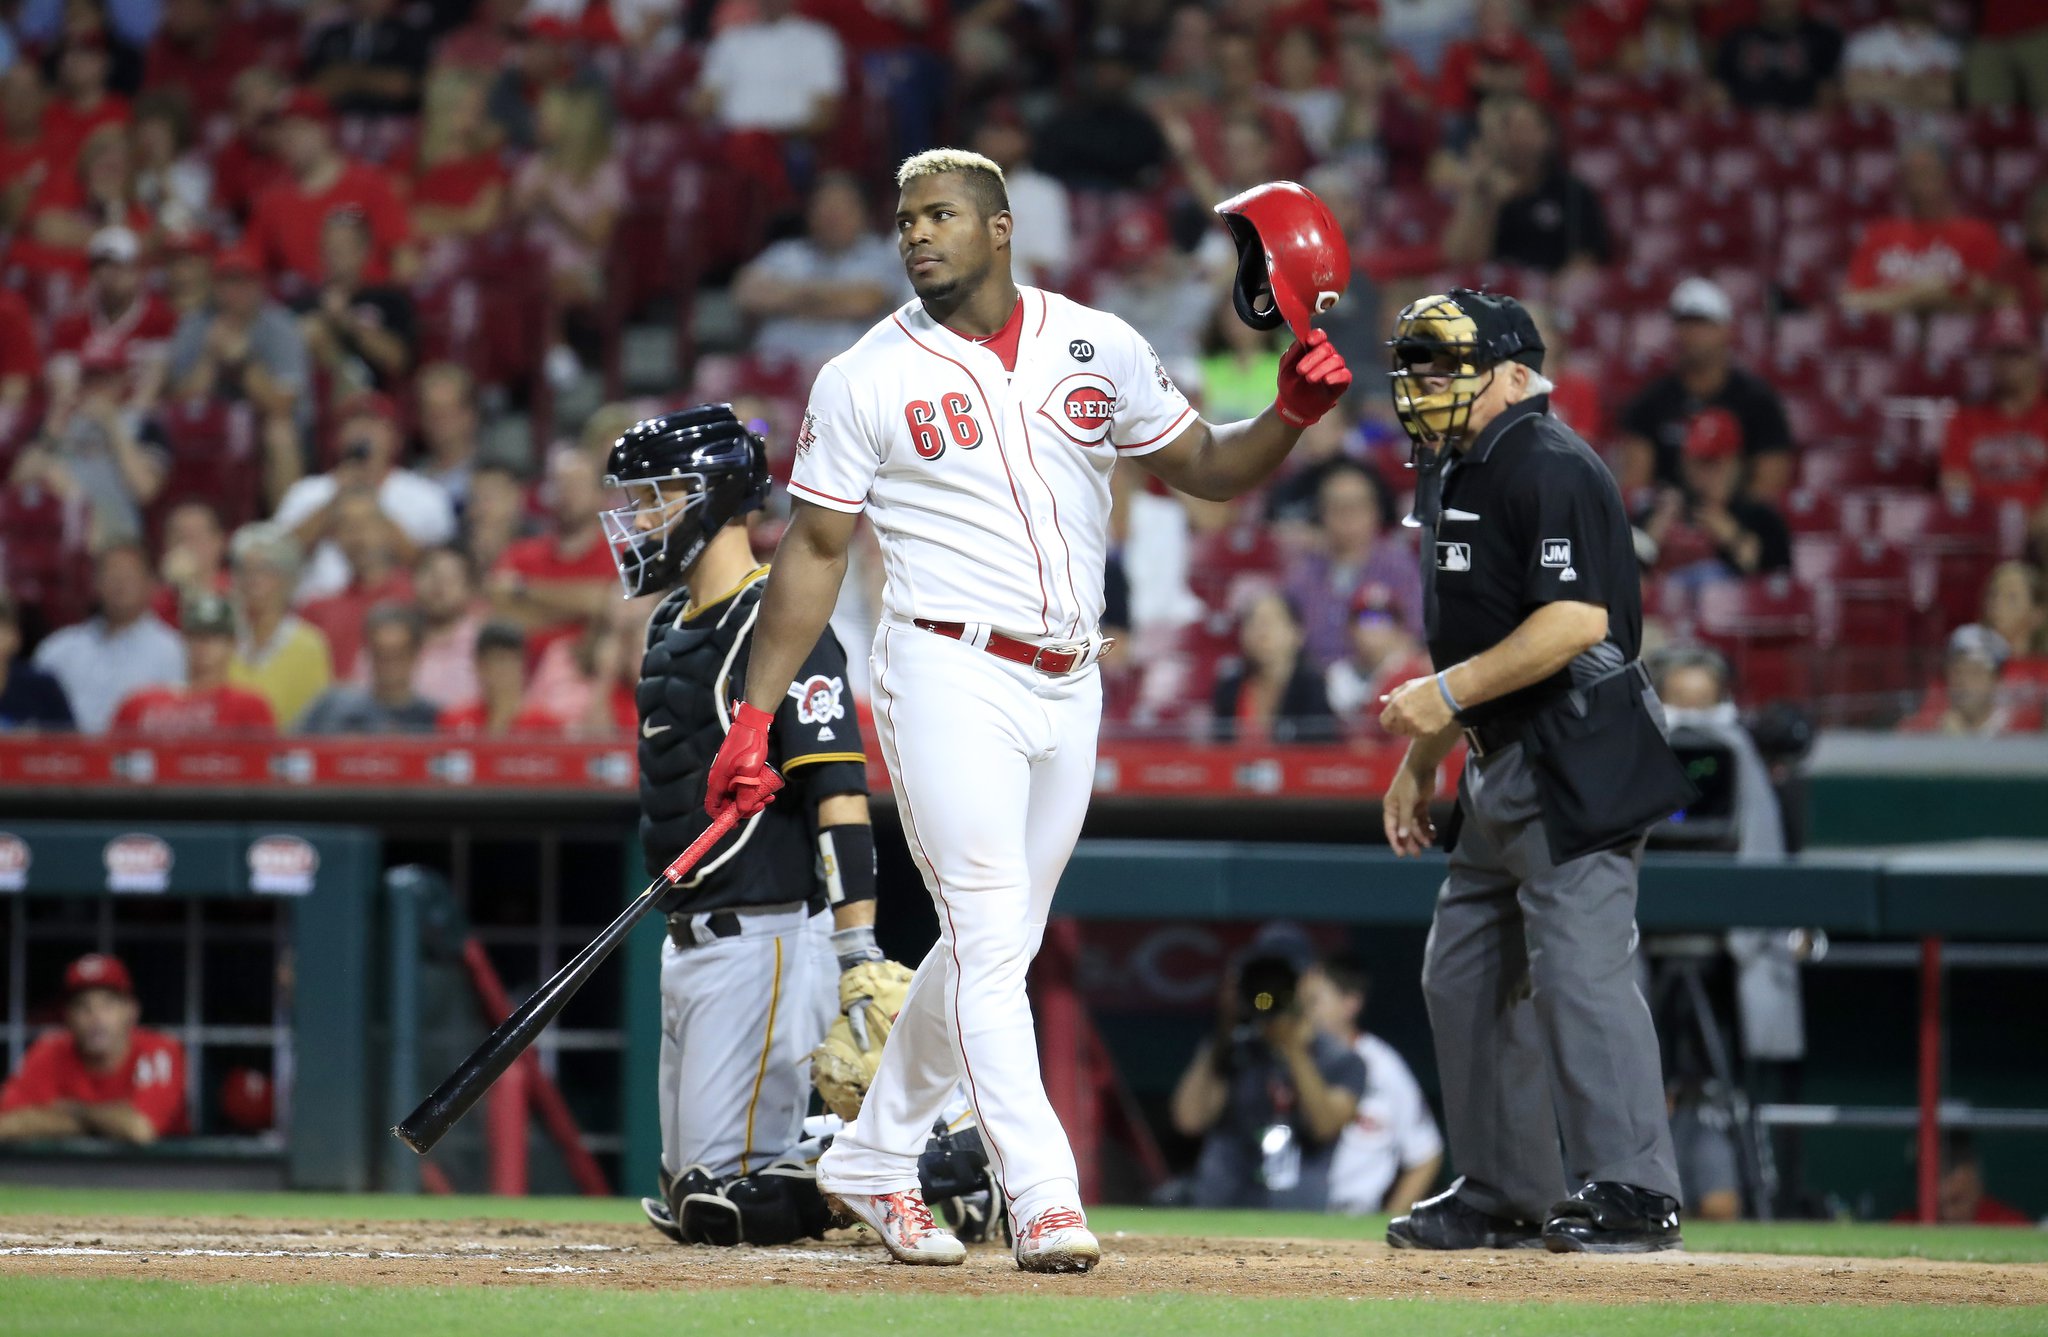 Clint Hurdle and the Pirates look to move past brawl with Reds